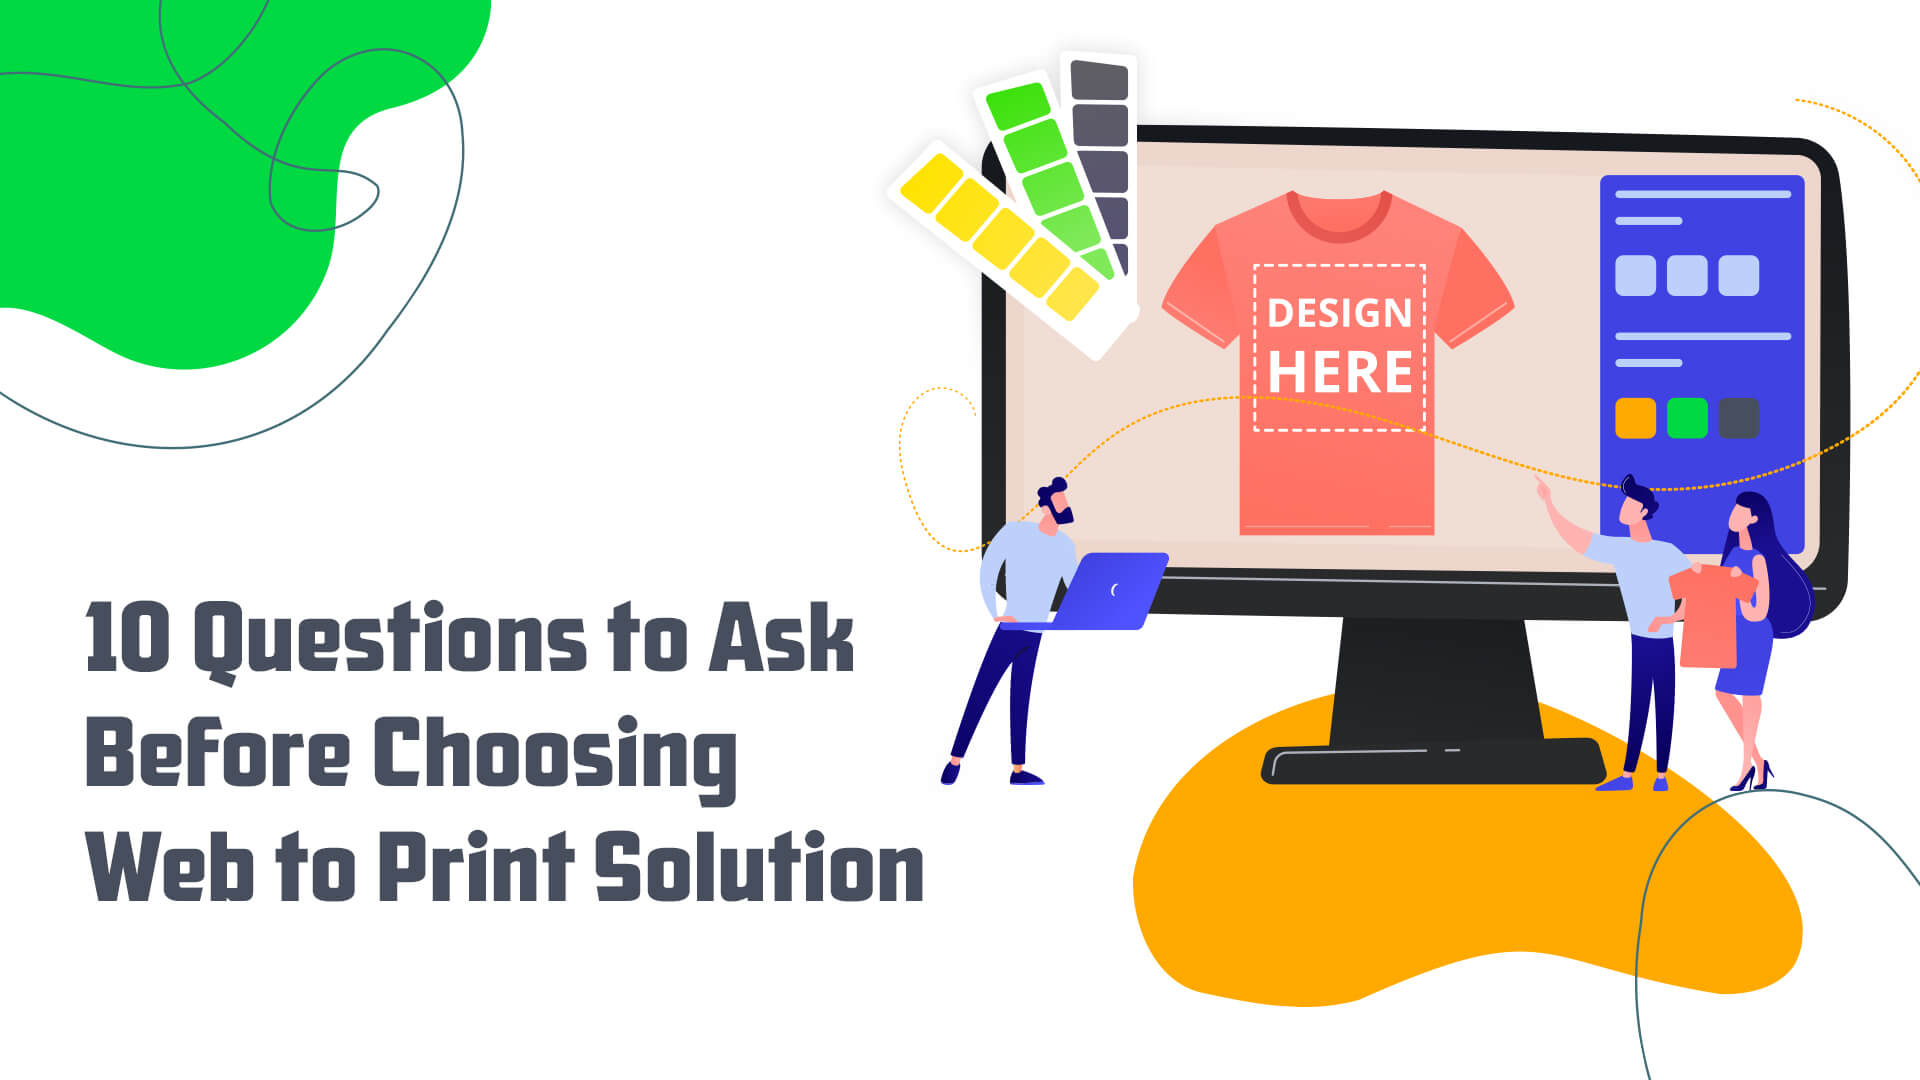 Questions to ask before choosing web to print solution